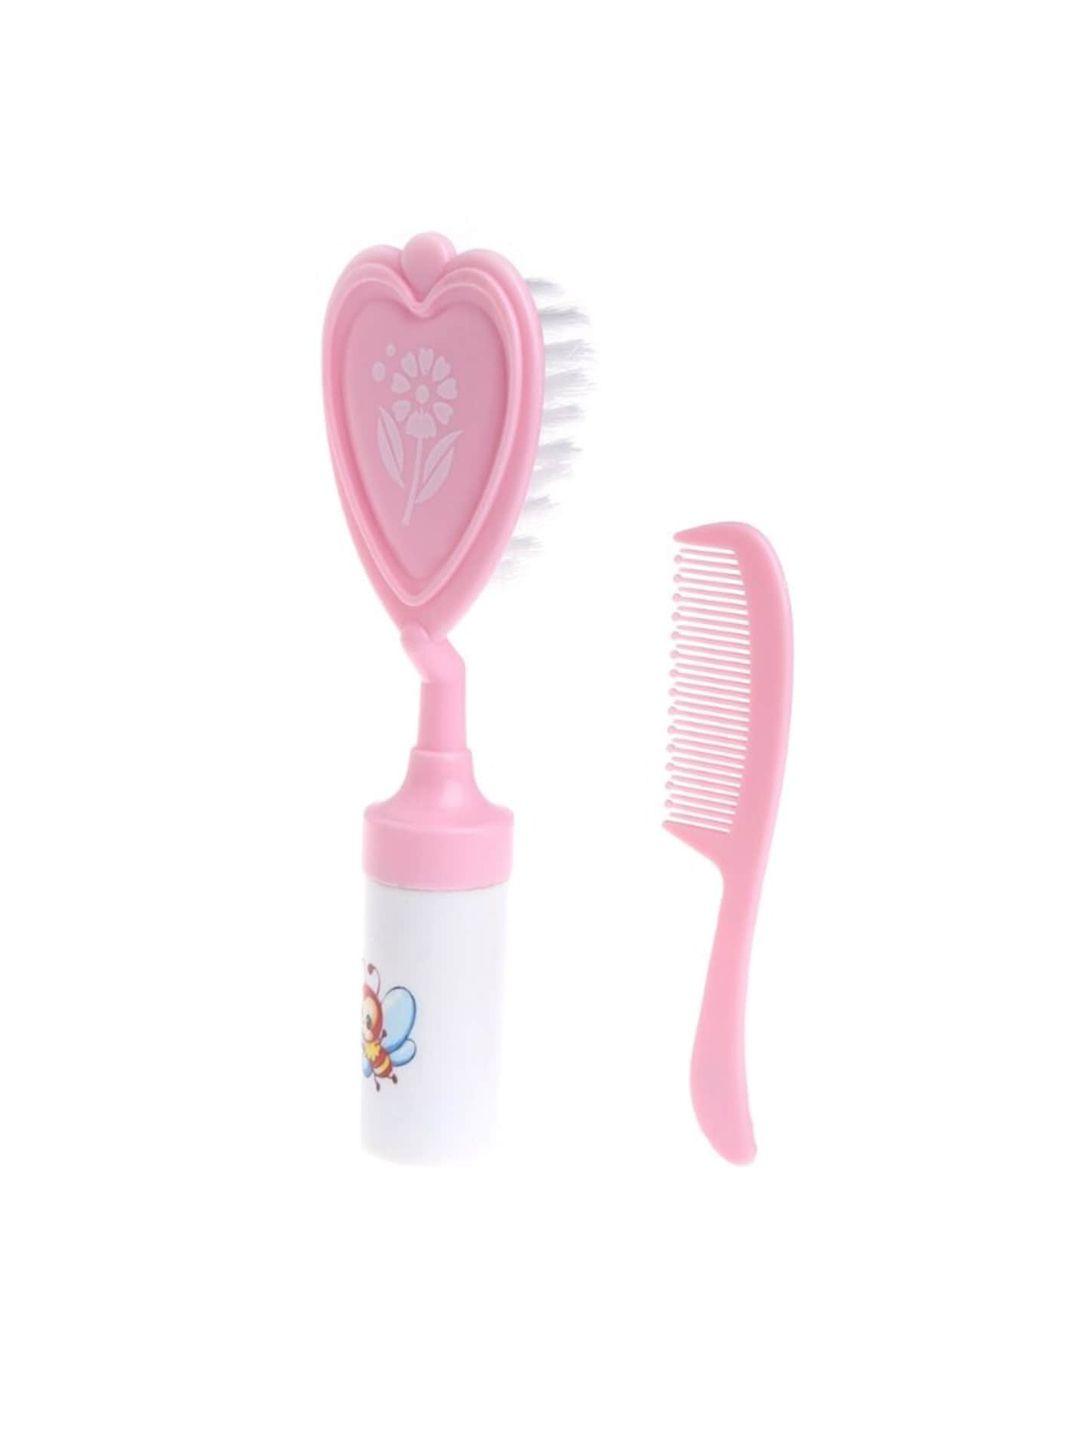 guchigu kids set of pink floral print heart shaped hair brush & wide tooth comb